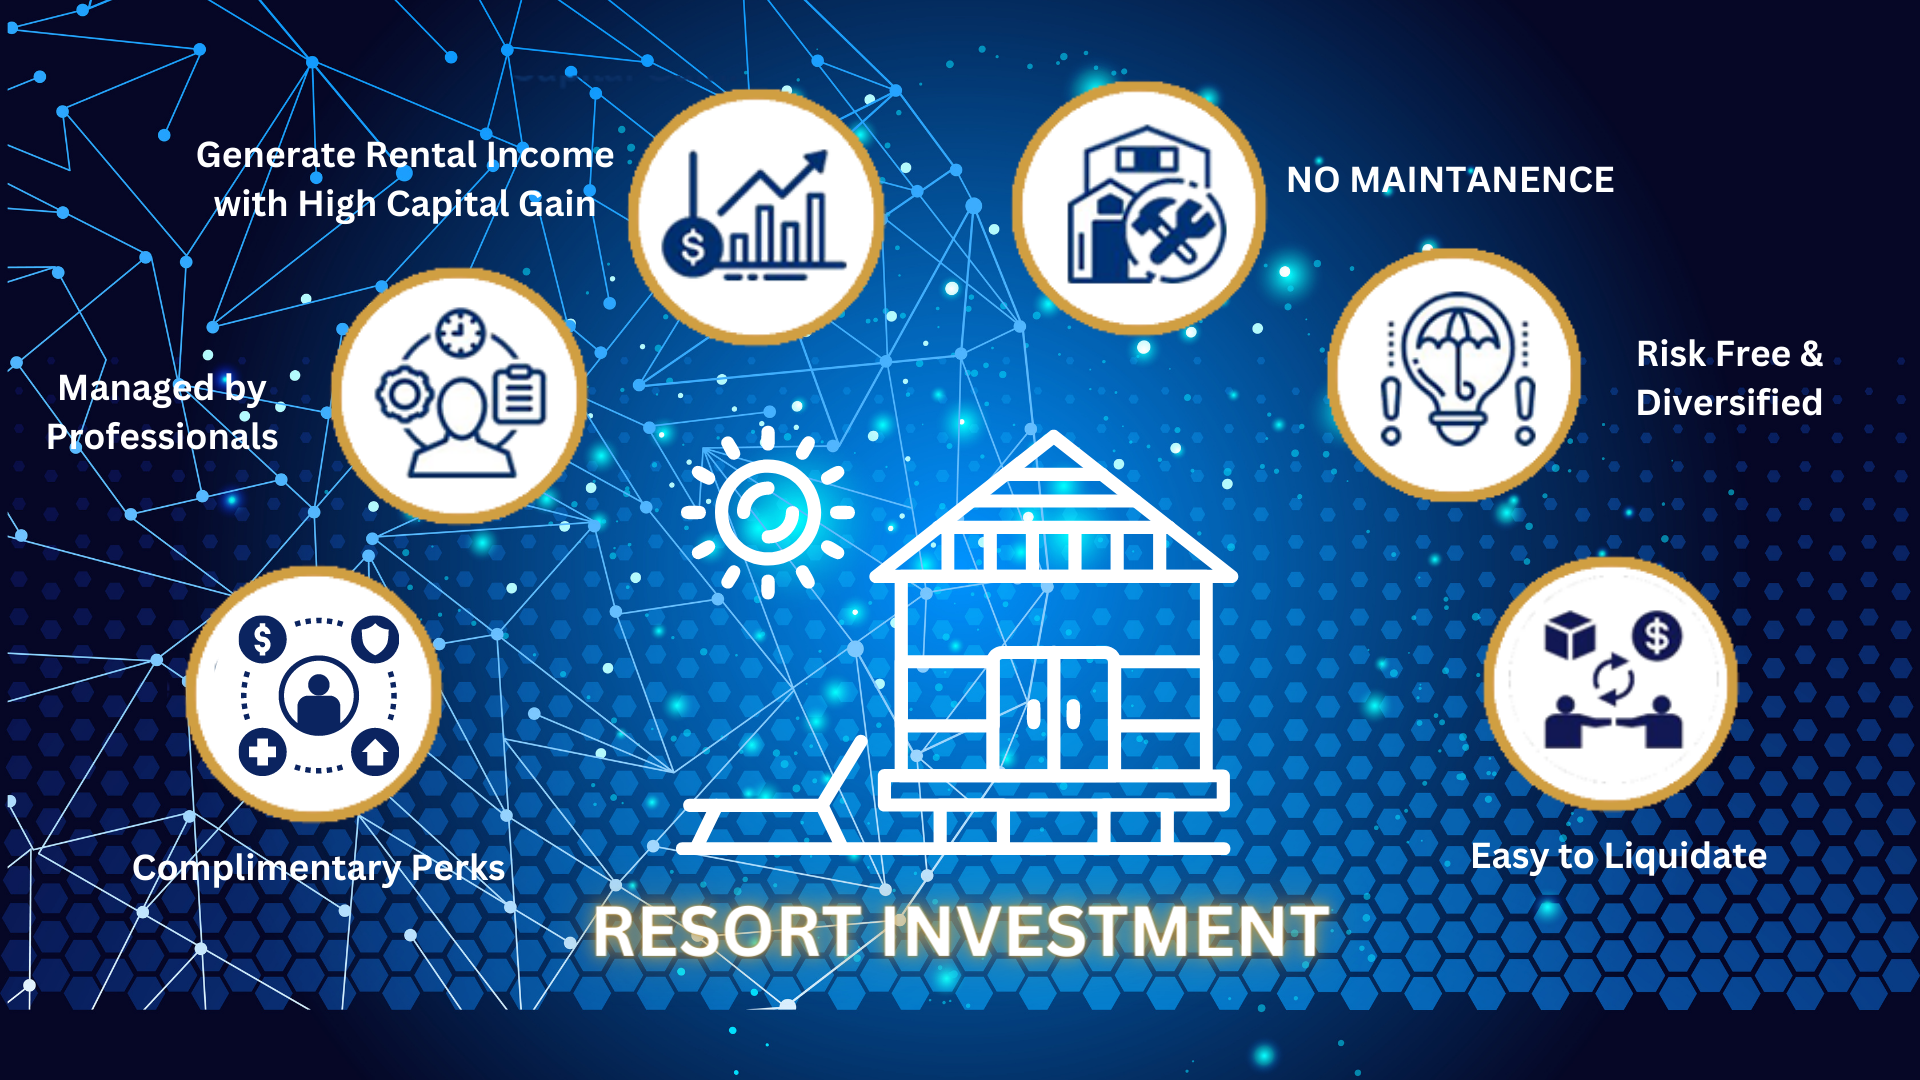 DIFFERENCE B/W RESORT INVESTMENT & OTHER REAL ESTATE INVESTMENT IN FRACTIONAL OWNERSHIP